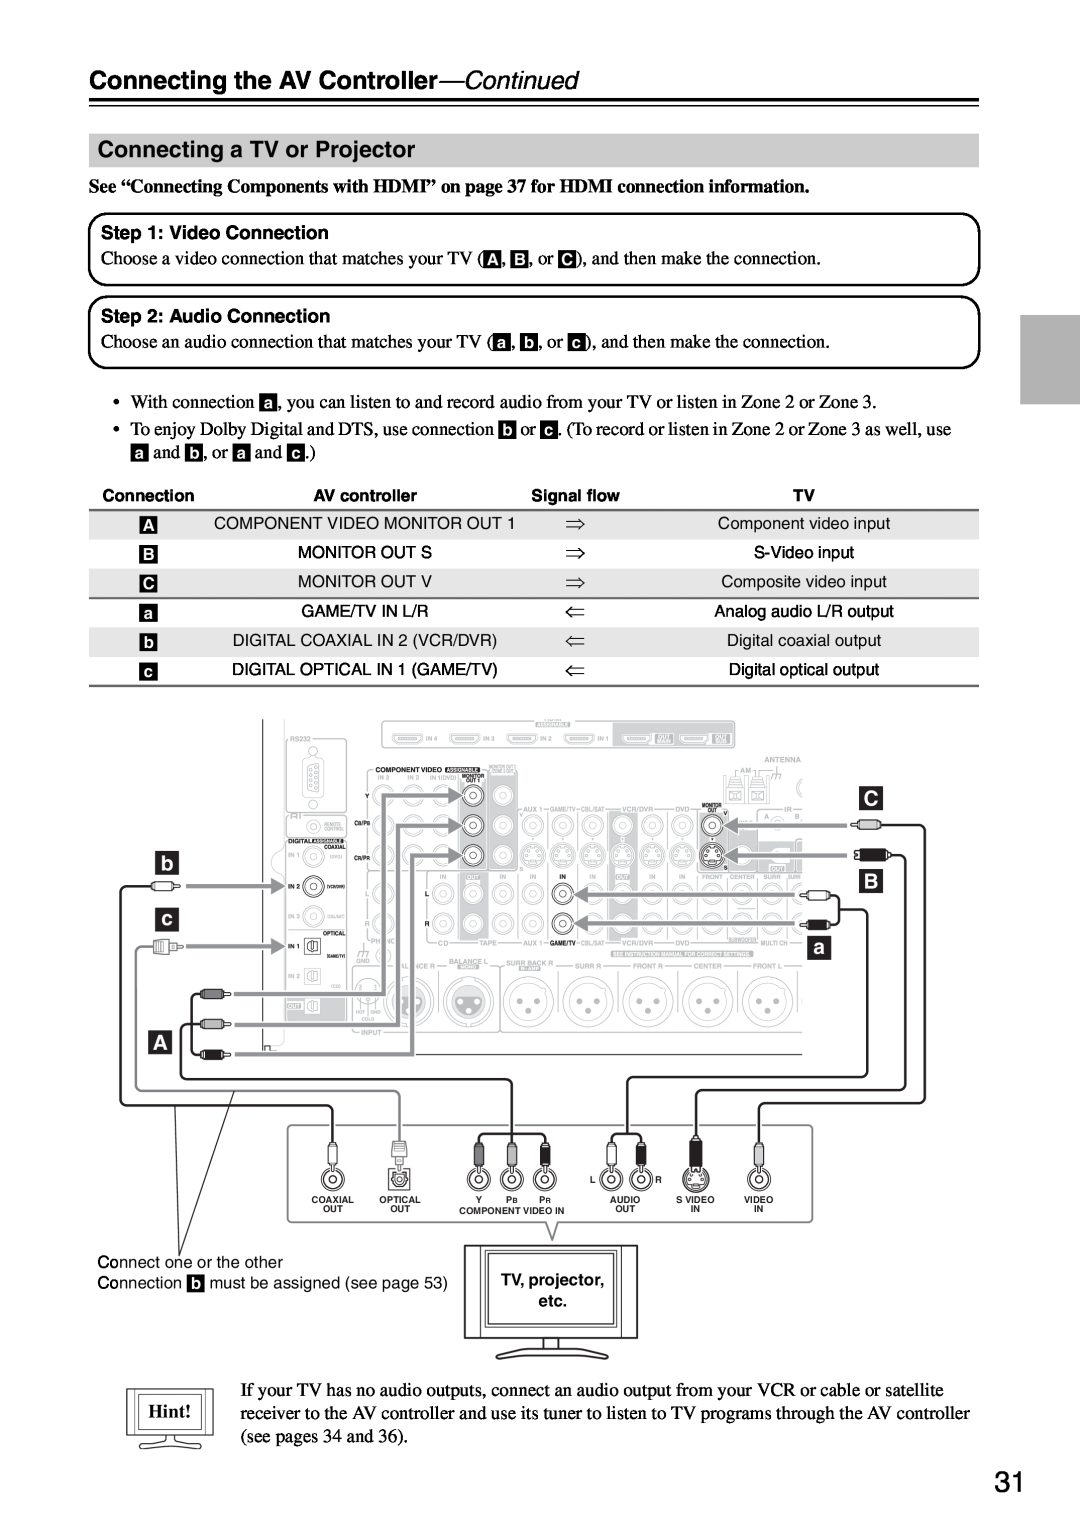 Onkyo PR-SC886 instruction manual Connecting a TV or Projector, b c A, Connecting the AV Controller—Continued, Hint 